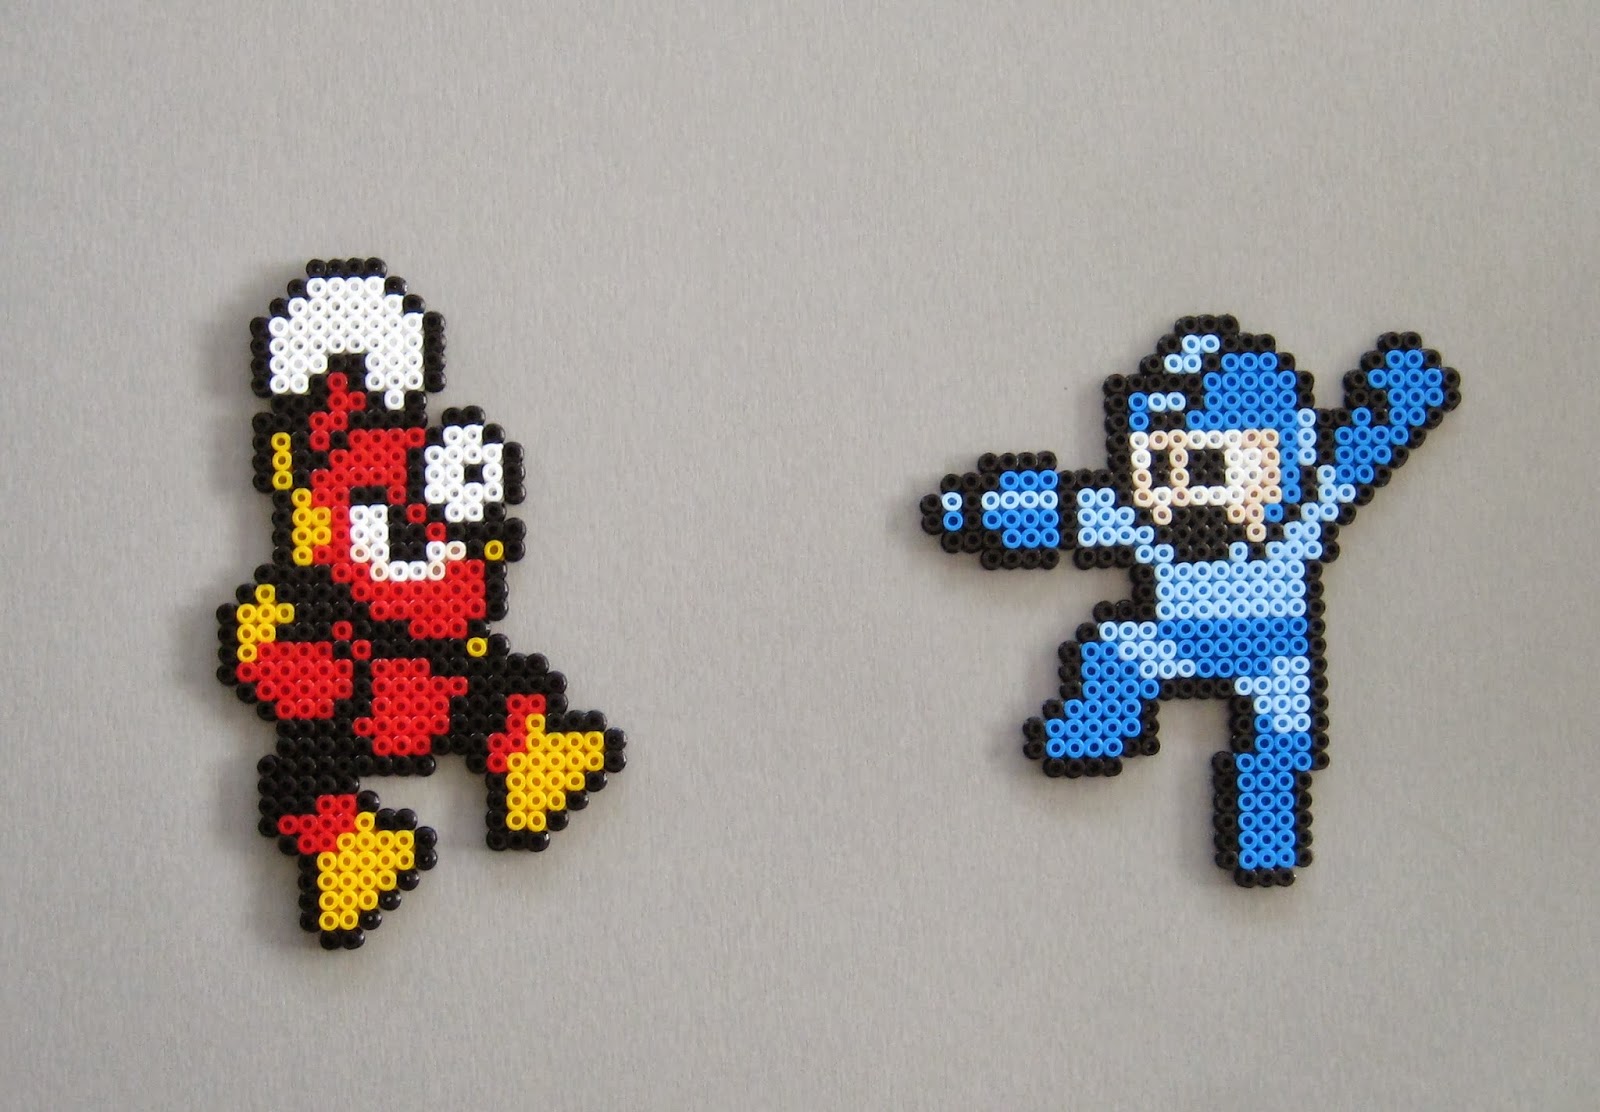 Rockman In Hama Beads Rockman 2 Dr Willy No Nazo ロックマン2 Dr ワイリーの謎